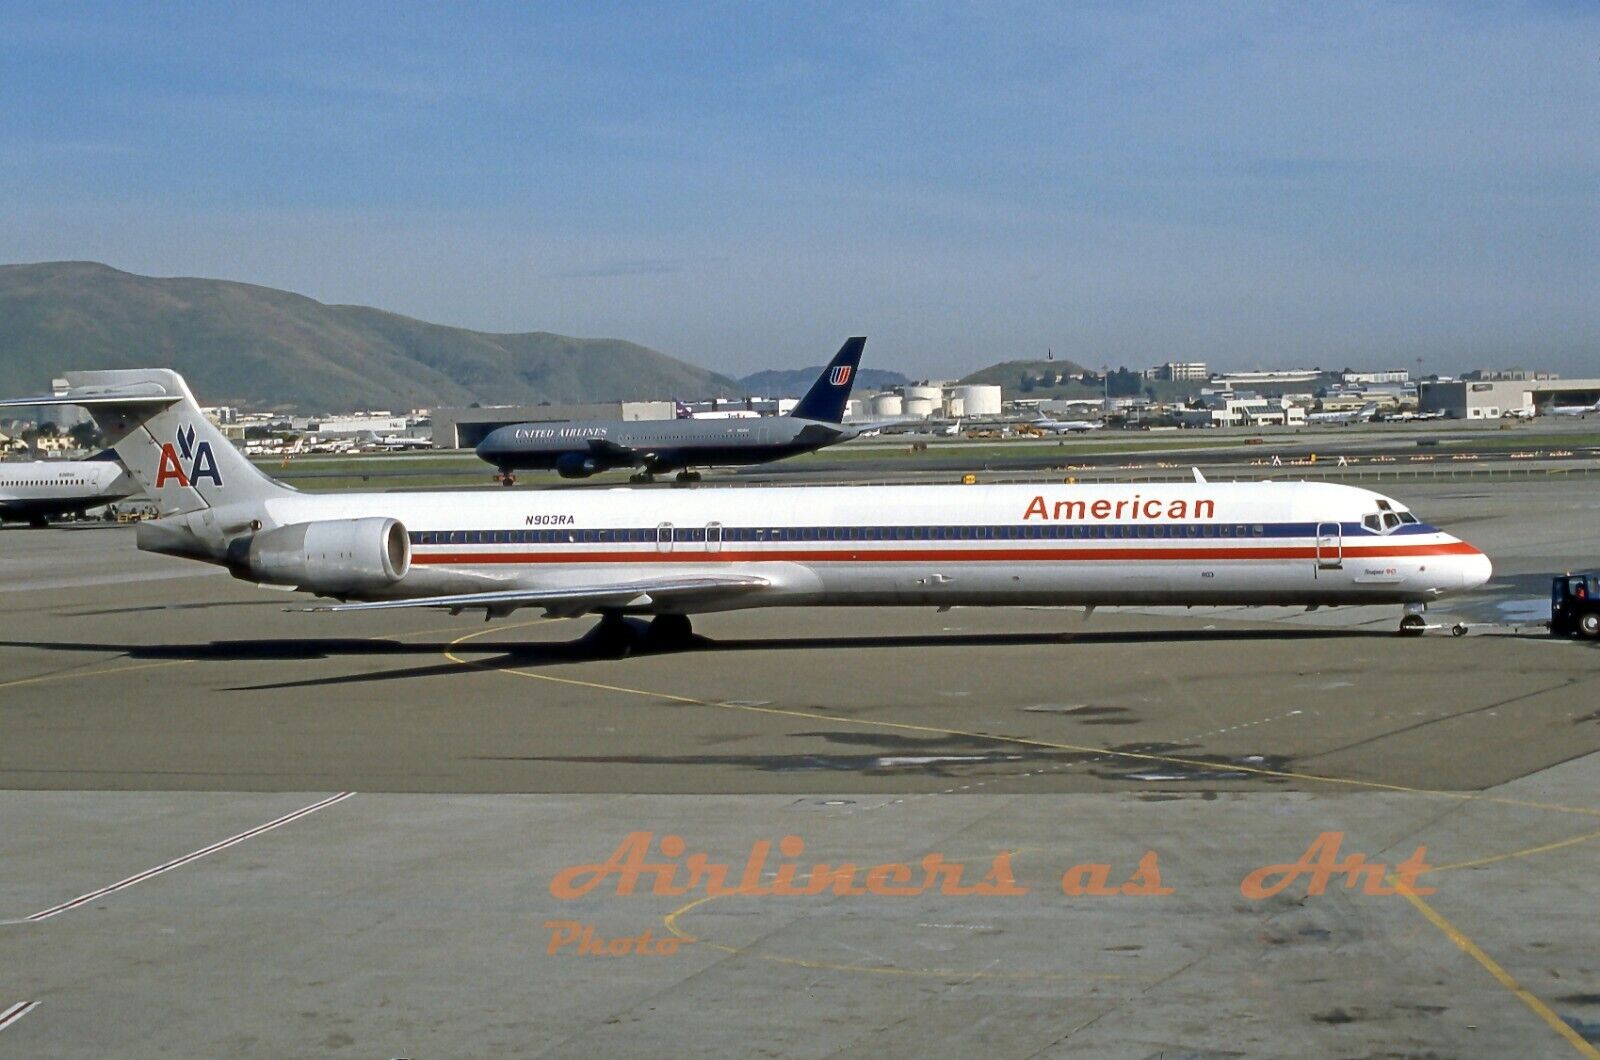 American Airlines McDonnell Douglas MD-90 N903RA at SFO 2001 8\